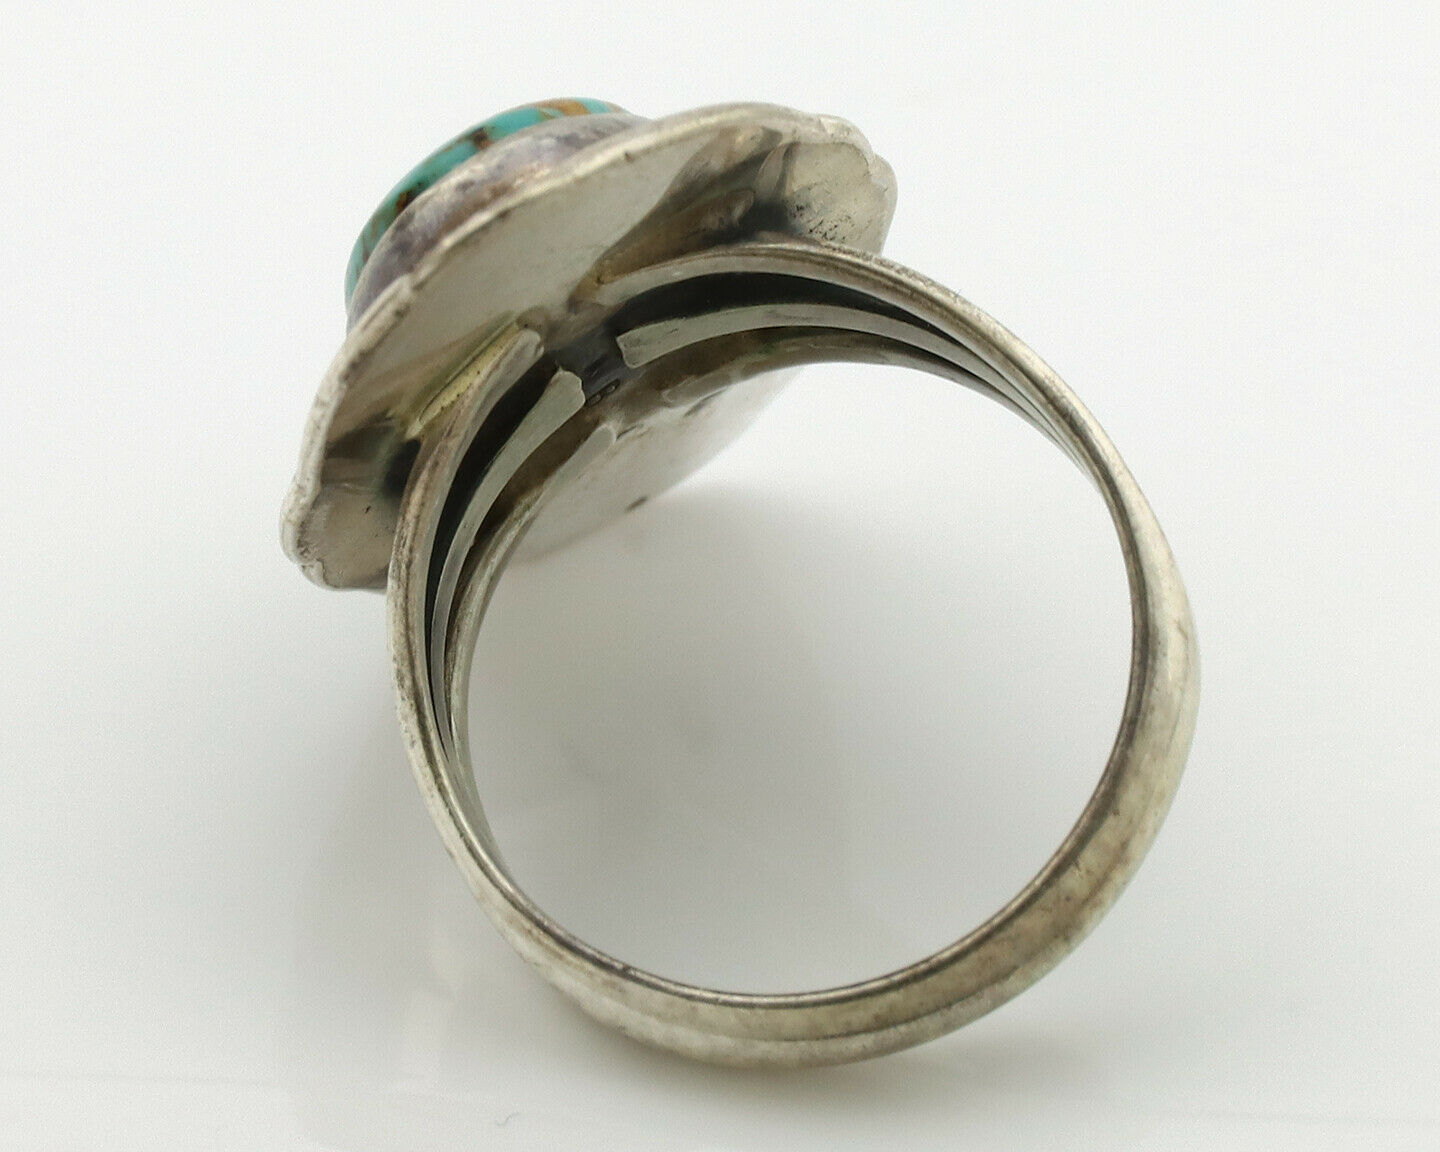 Navajo Ring .925 Silver Kingman Turquoise Signed M Begay C.1980's